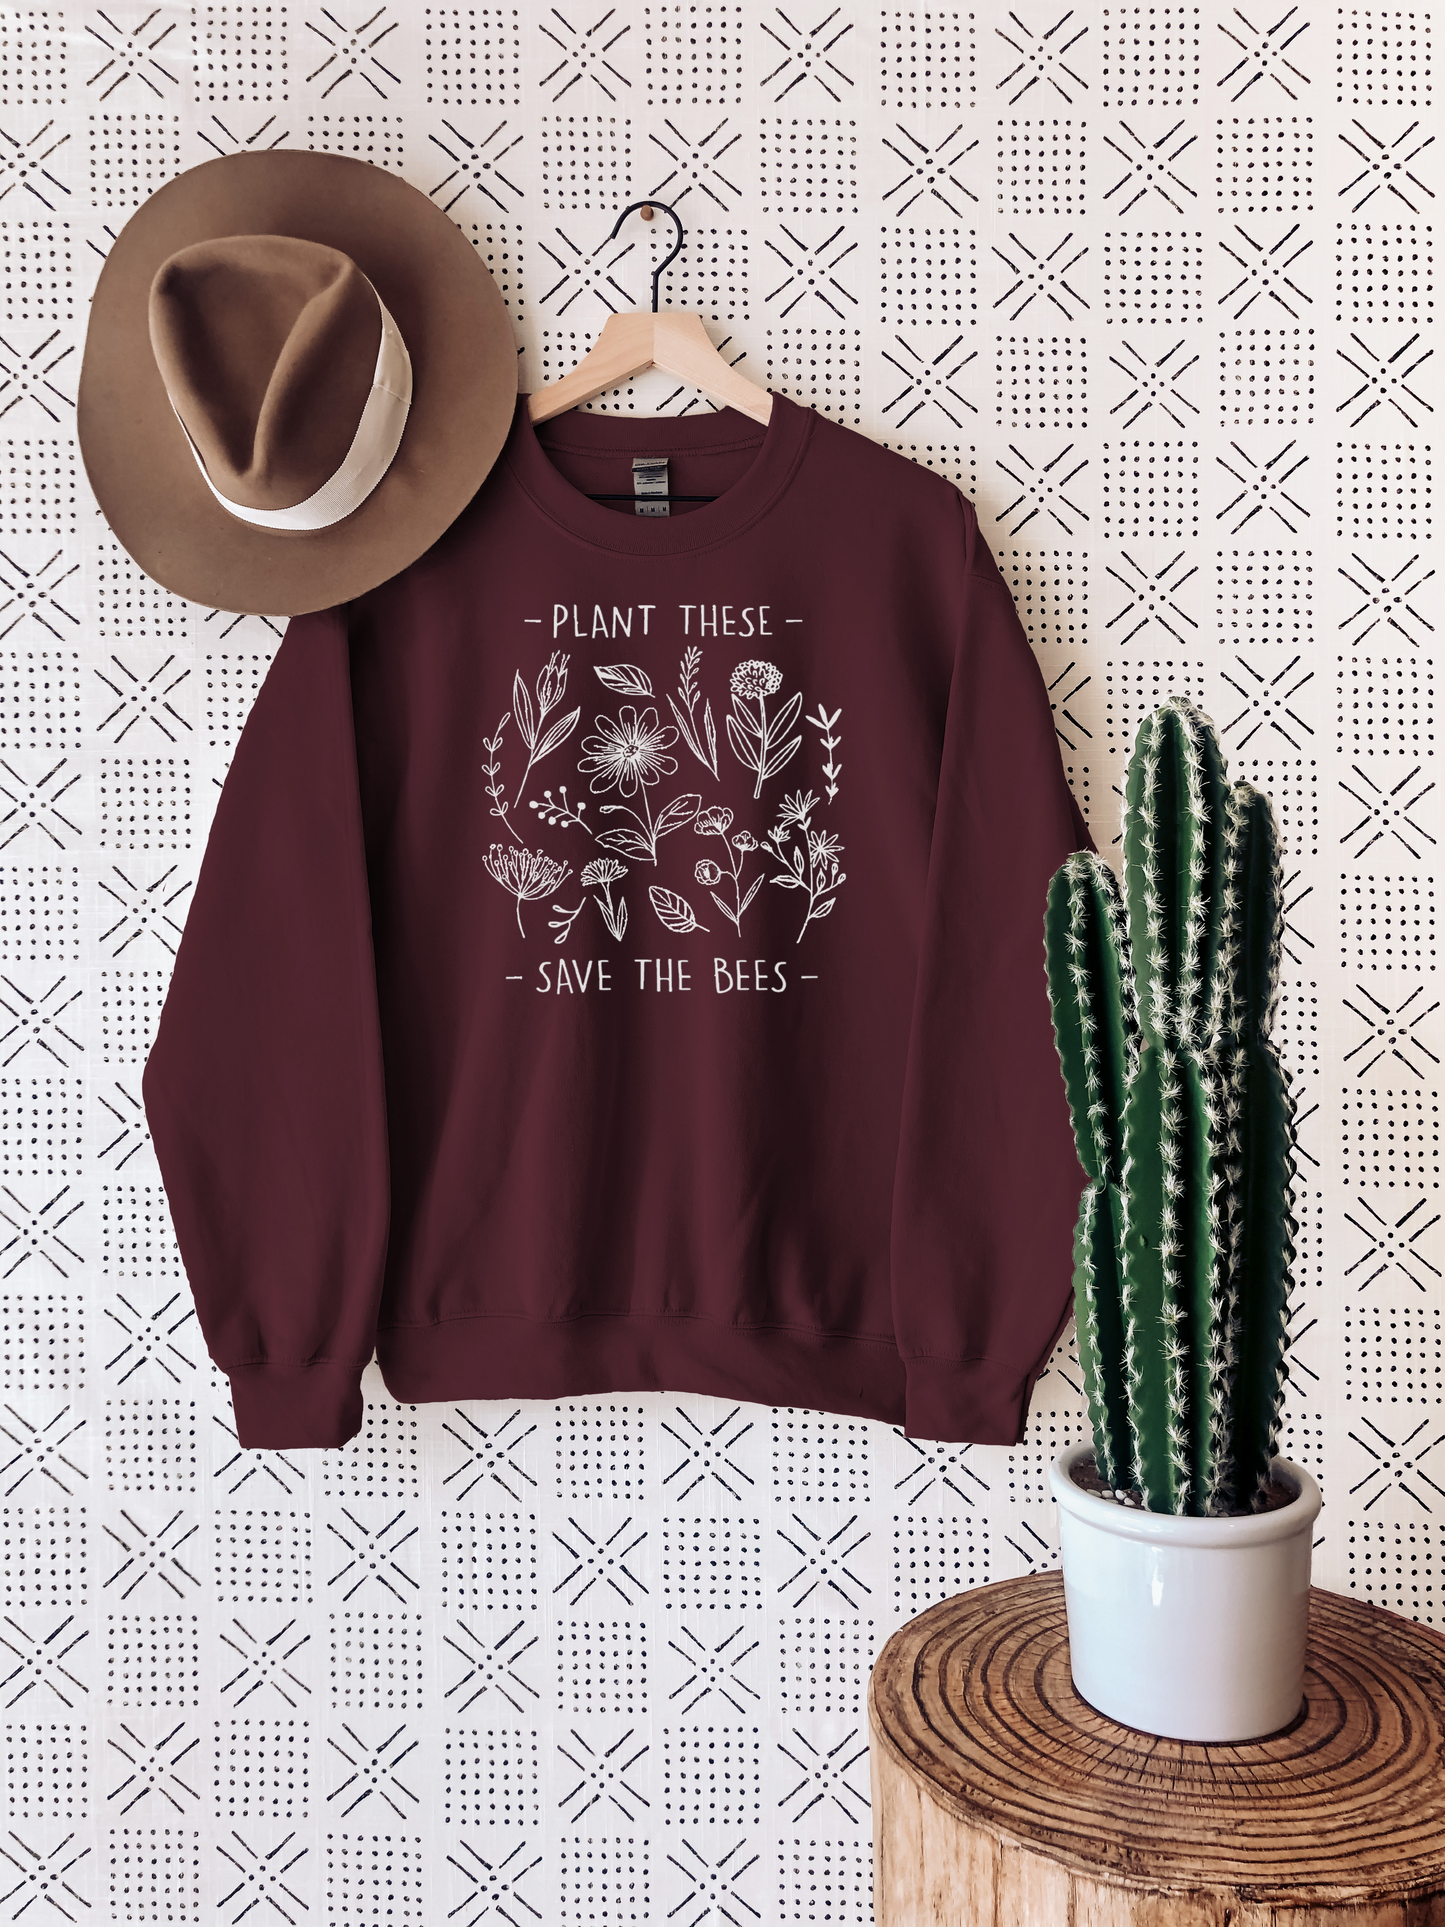 Plant These, Save The Bees Sweatshirt